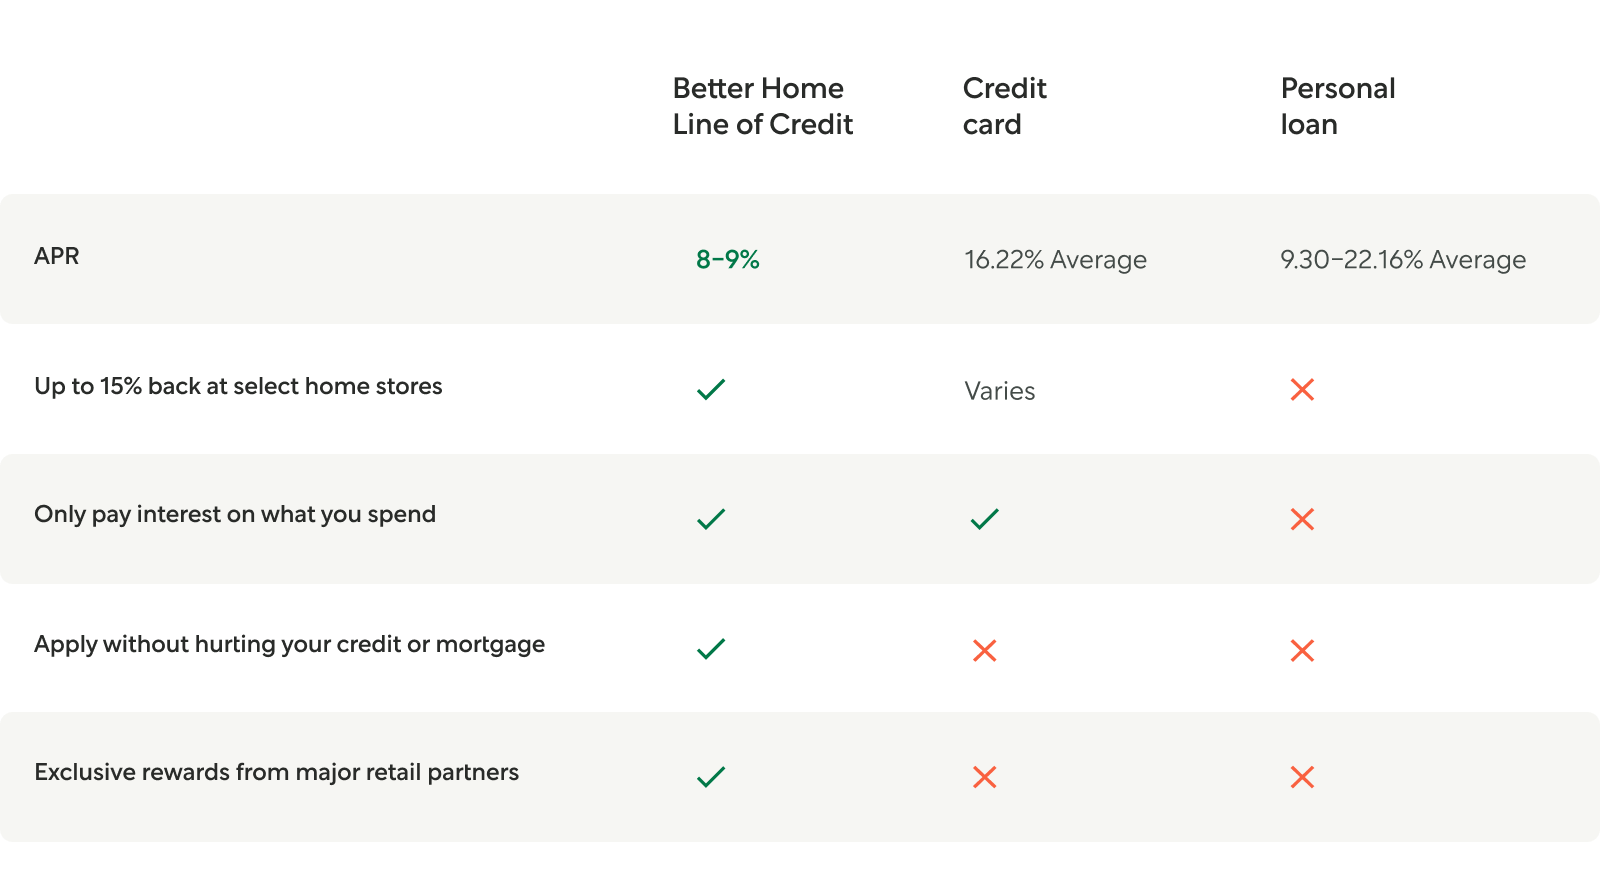 Chart Showing the Difference Between the Better Home Line of Credit, a Credit Card, and a Personal Loan